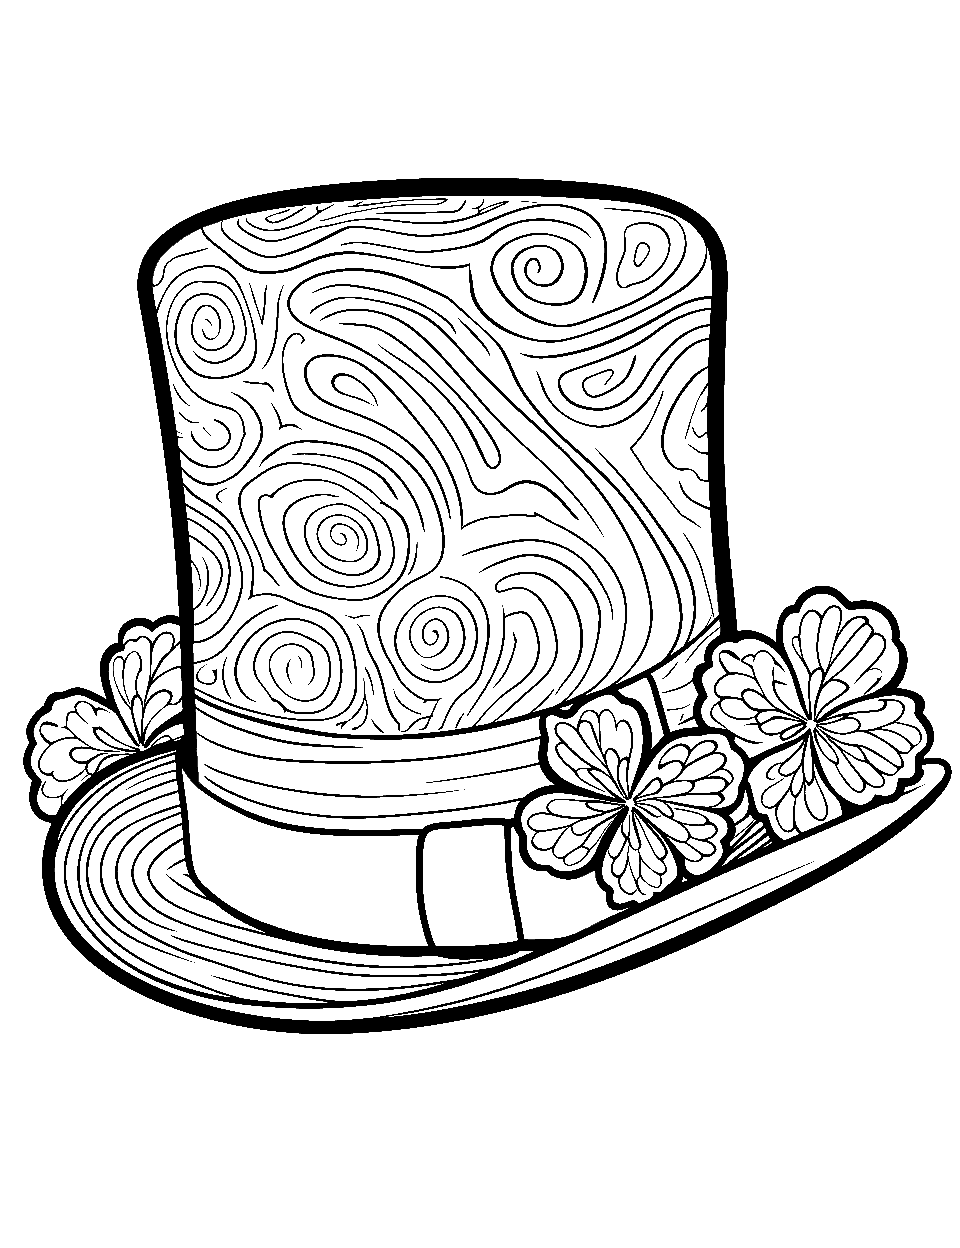 Leprechaun Hat Close-up Coloring Page - A close-up view of a leprechaun hat, showing its textures and details.